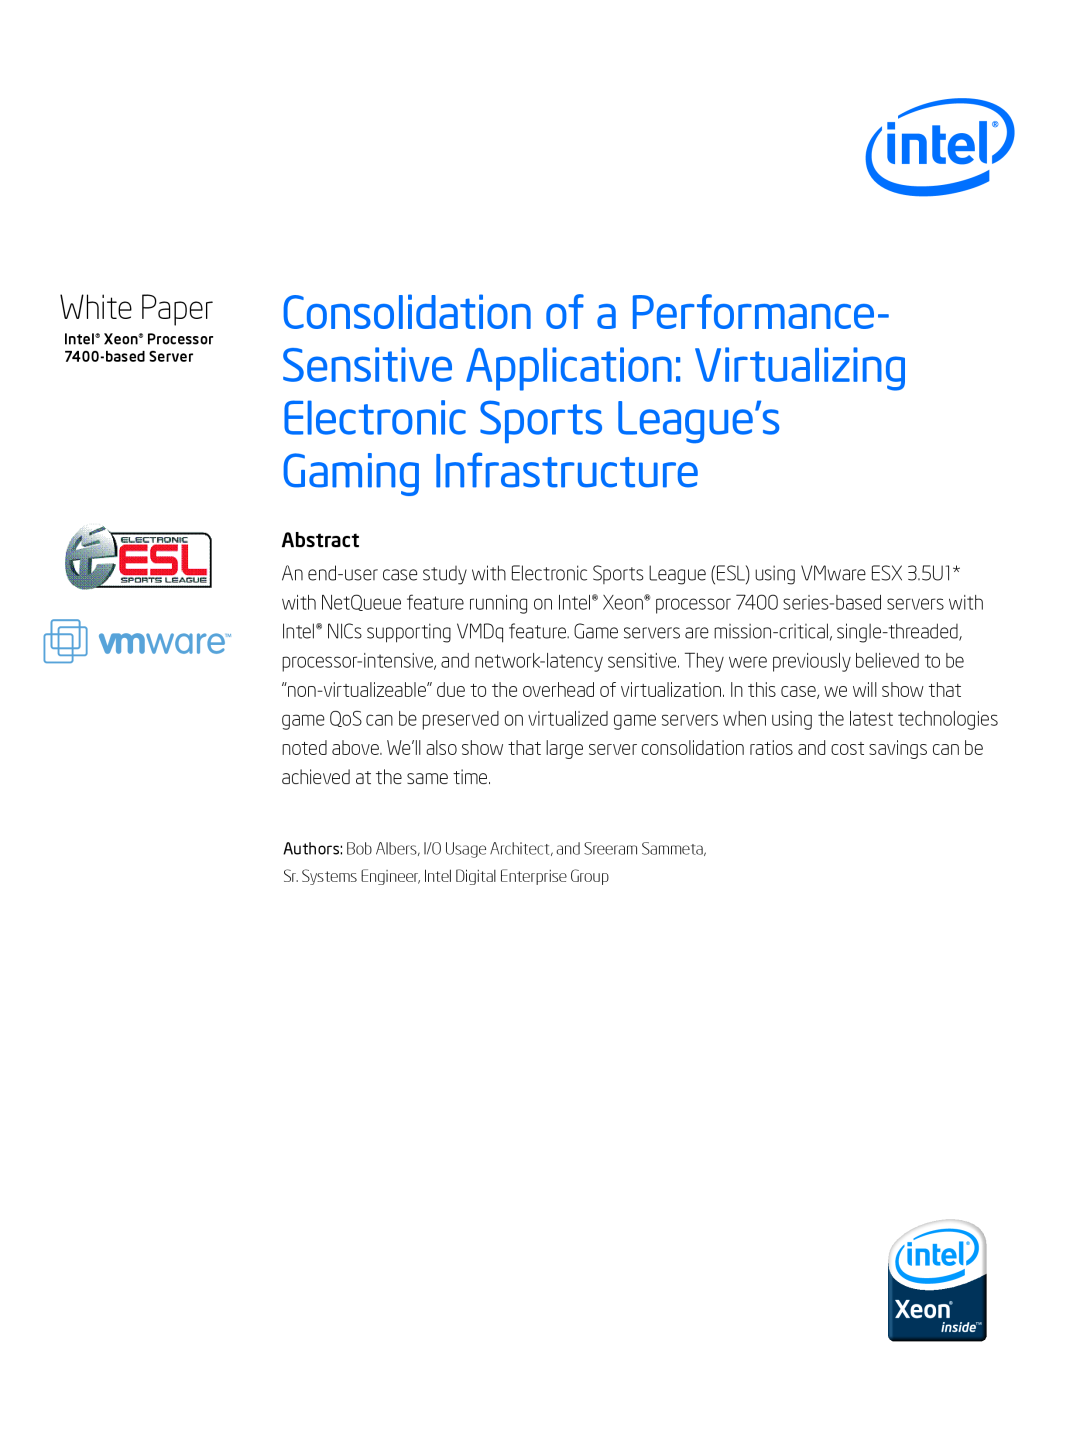 Intel 7400 manual Abstract, Consolidation of a Performance Sensitive Application Virtualizing, White Paper 